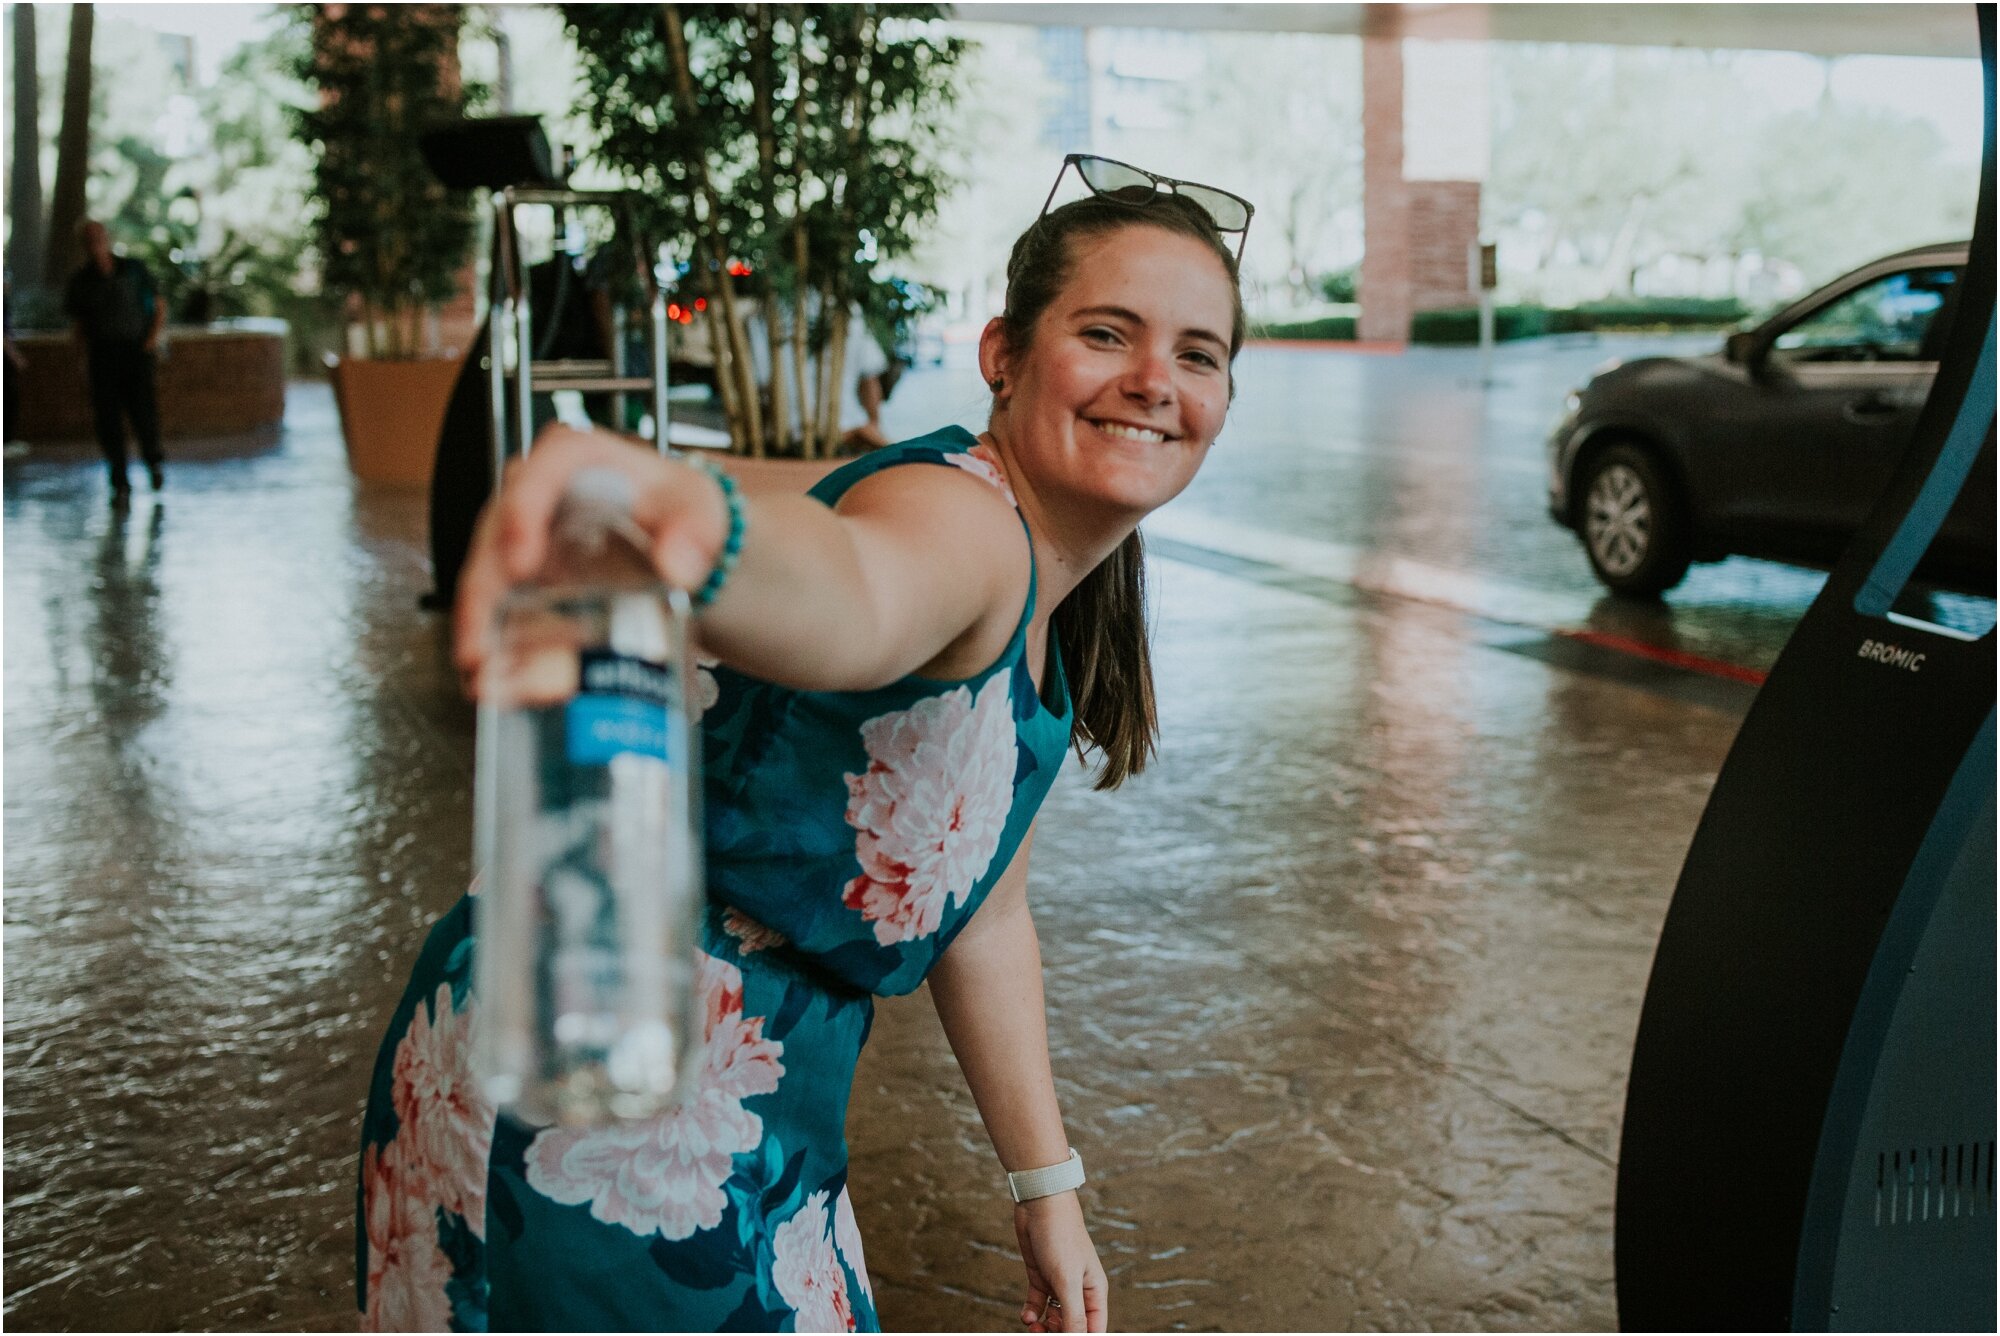   Trying to keep the groom hydrated, apparently, before we head out to the first look!   Photo: Jeff Patterson  